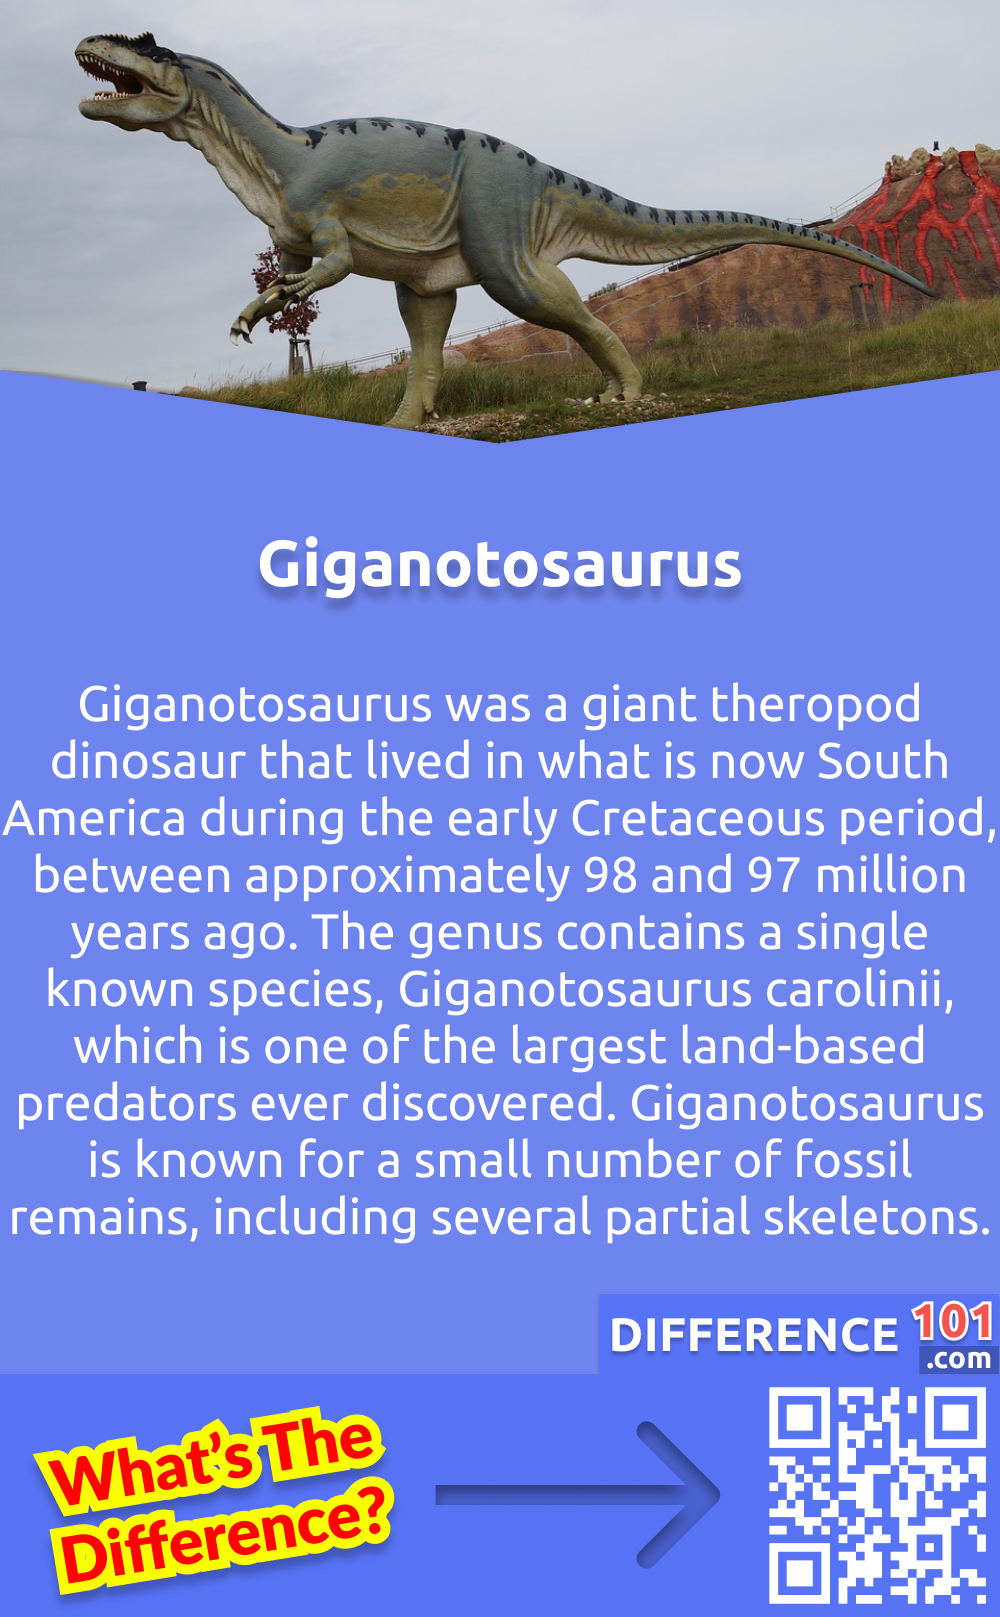 What Is Giganosaurus? Giganotosaurus was a giant theropod dinosaur that lived in what is now South America during the early Cretaceous period, between approximately 98 and 97 million years ago. The genus contains a single known species, Giganotosaurus carolinii, which is one of the largest land-based predators ever discovered. Giganotosaurus is known for a small number of fossil remains, including several partial skeletons.